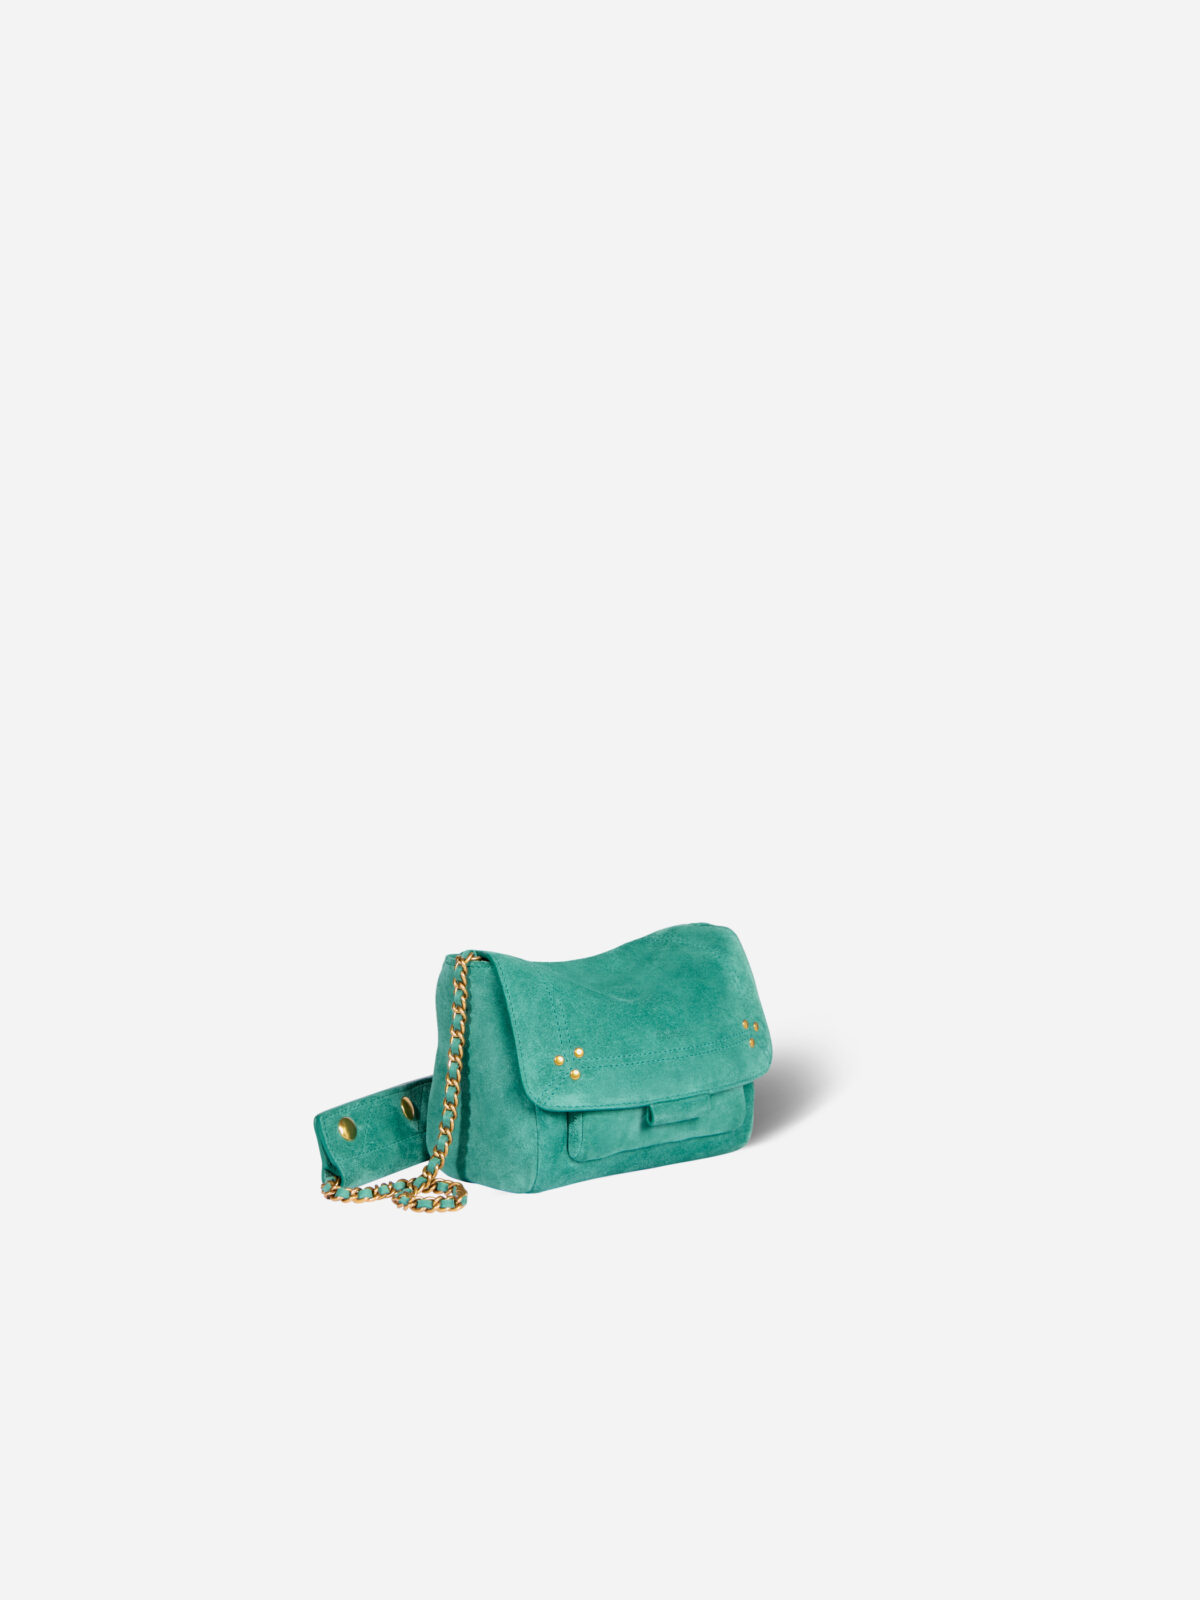 43LULUSCR_Cactus_suede-green-leather-small-flap-bag-jerome-dreyfuss-matchboxathens